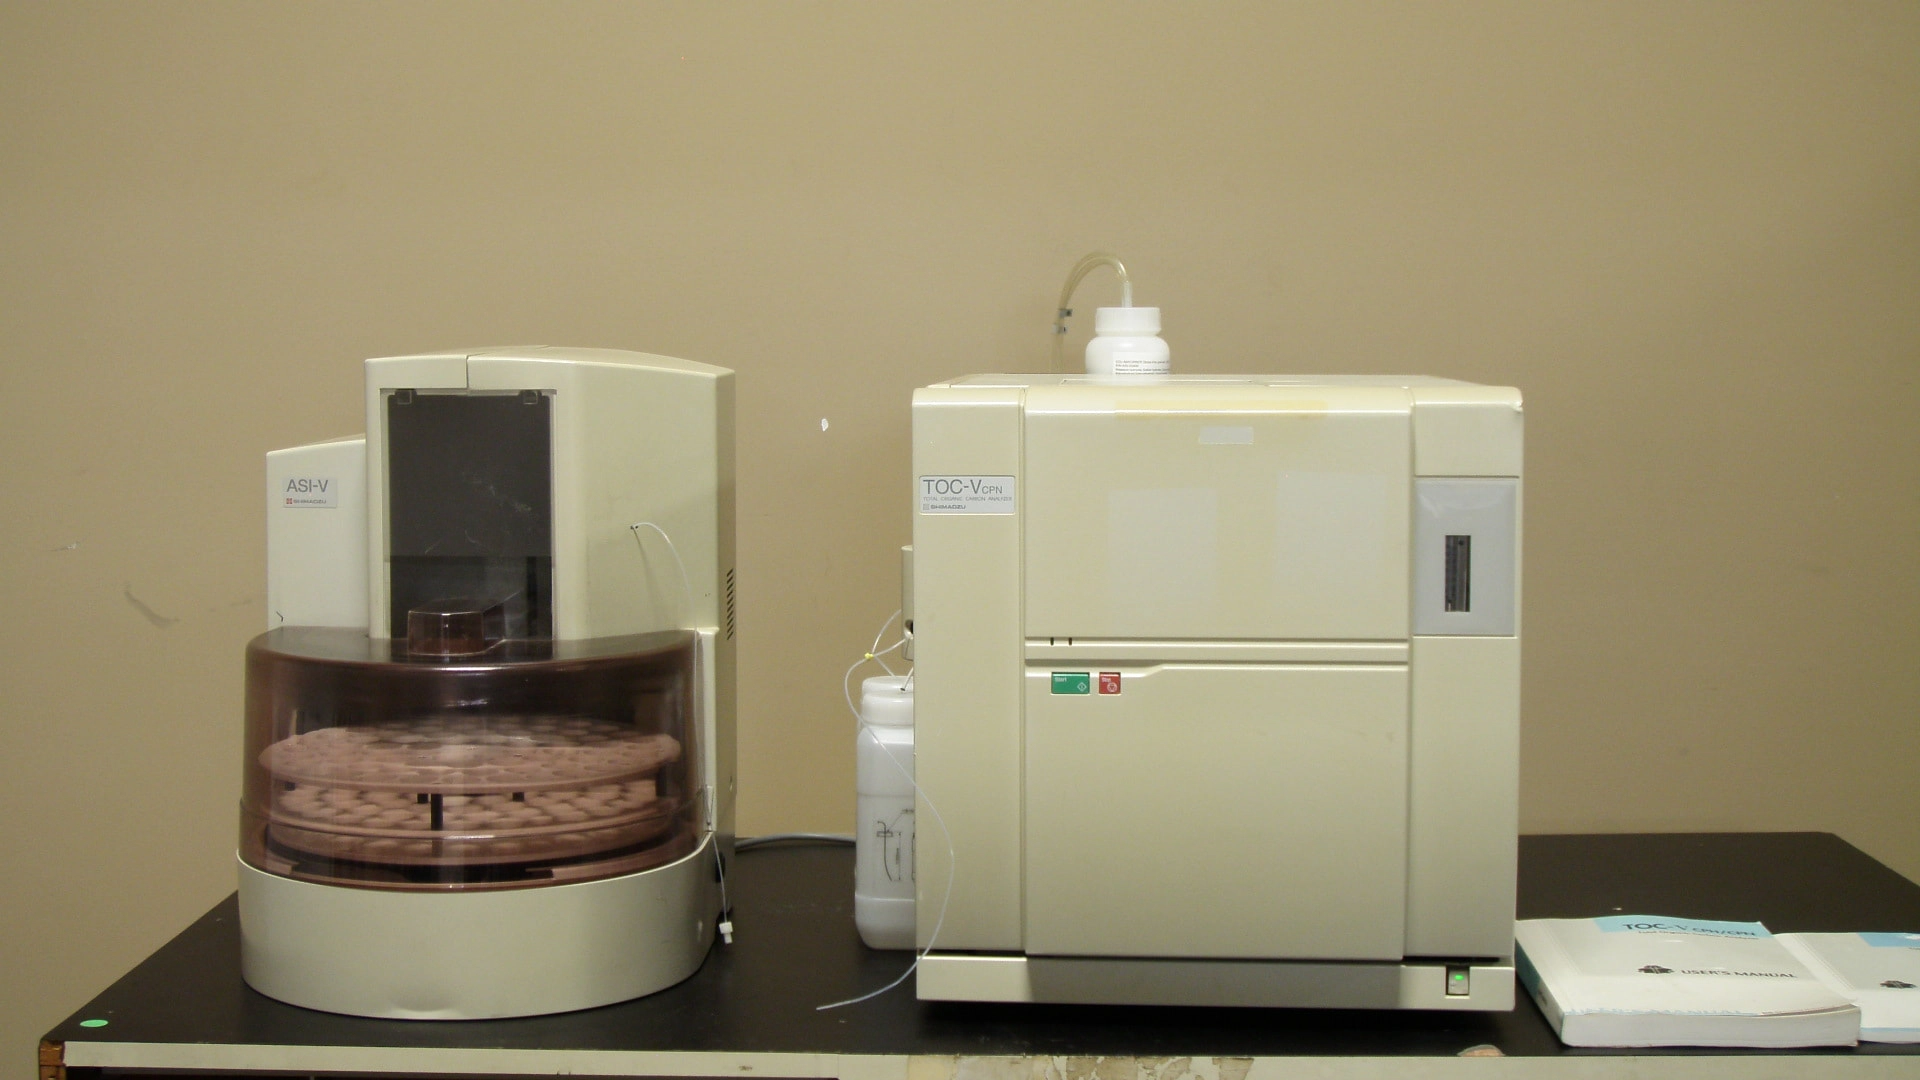 Shimadzu  Total Organic Carbon TOC-V CPN with ASI-V Autosampler